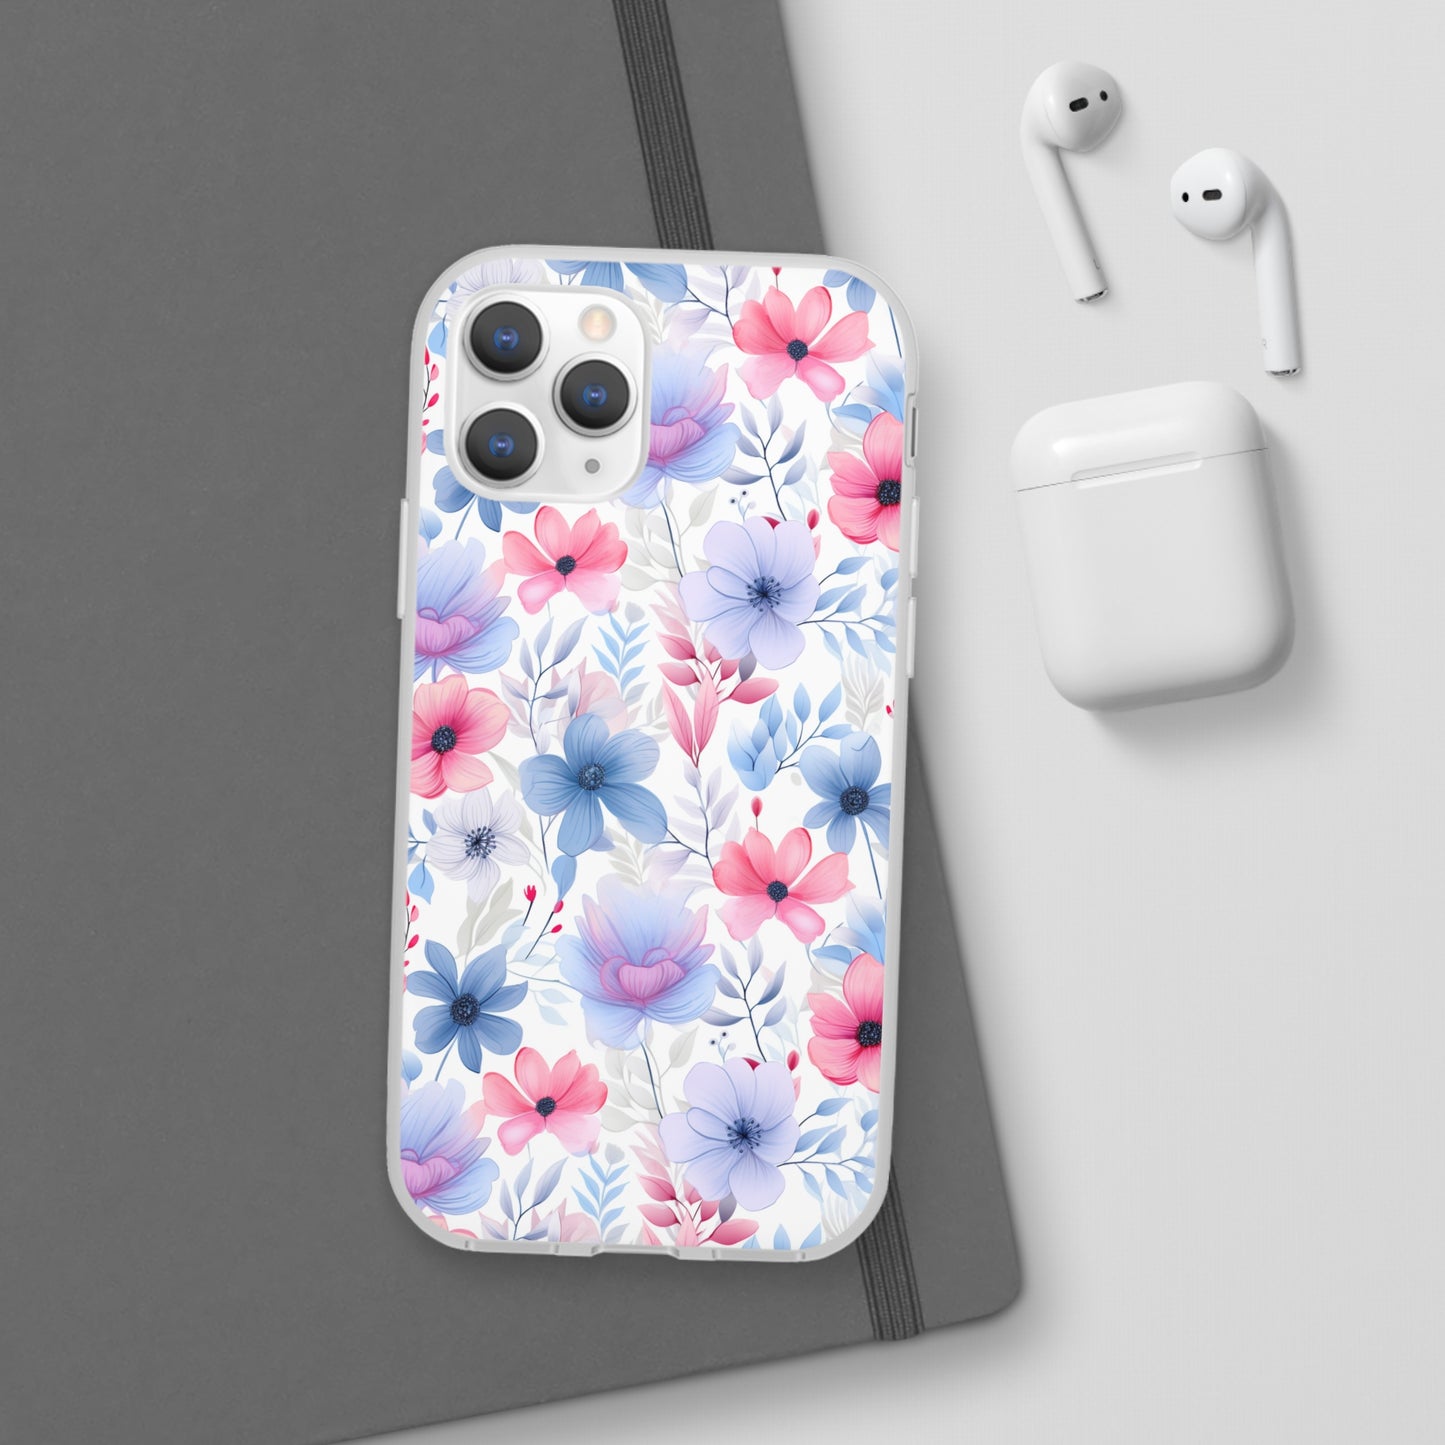 Floral Whispers - Soft Hues of Violets, Pinks, and Blues - Flexi Phone Case Phone Case Pattern Symphony iPhone 11 Pro  